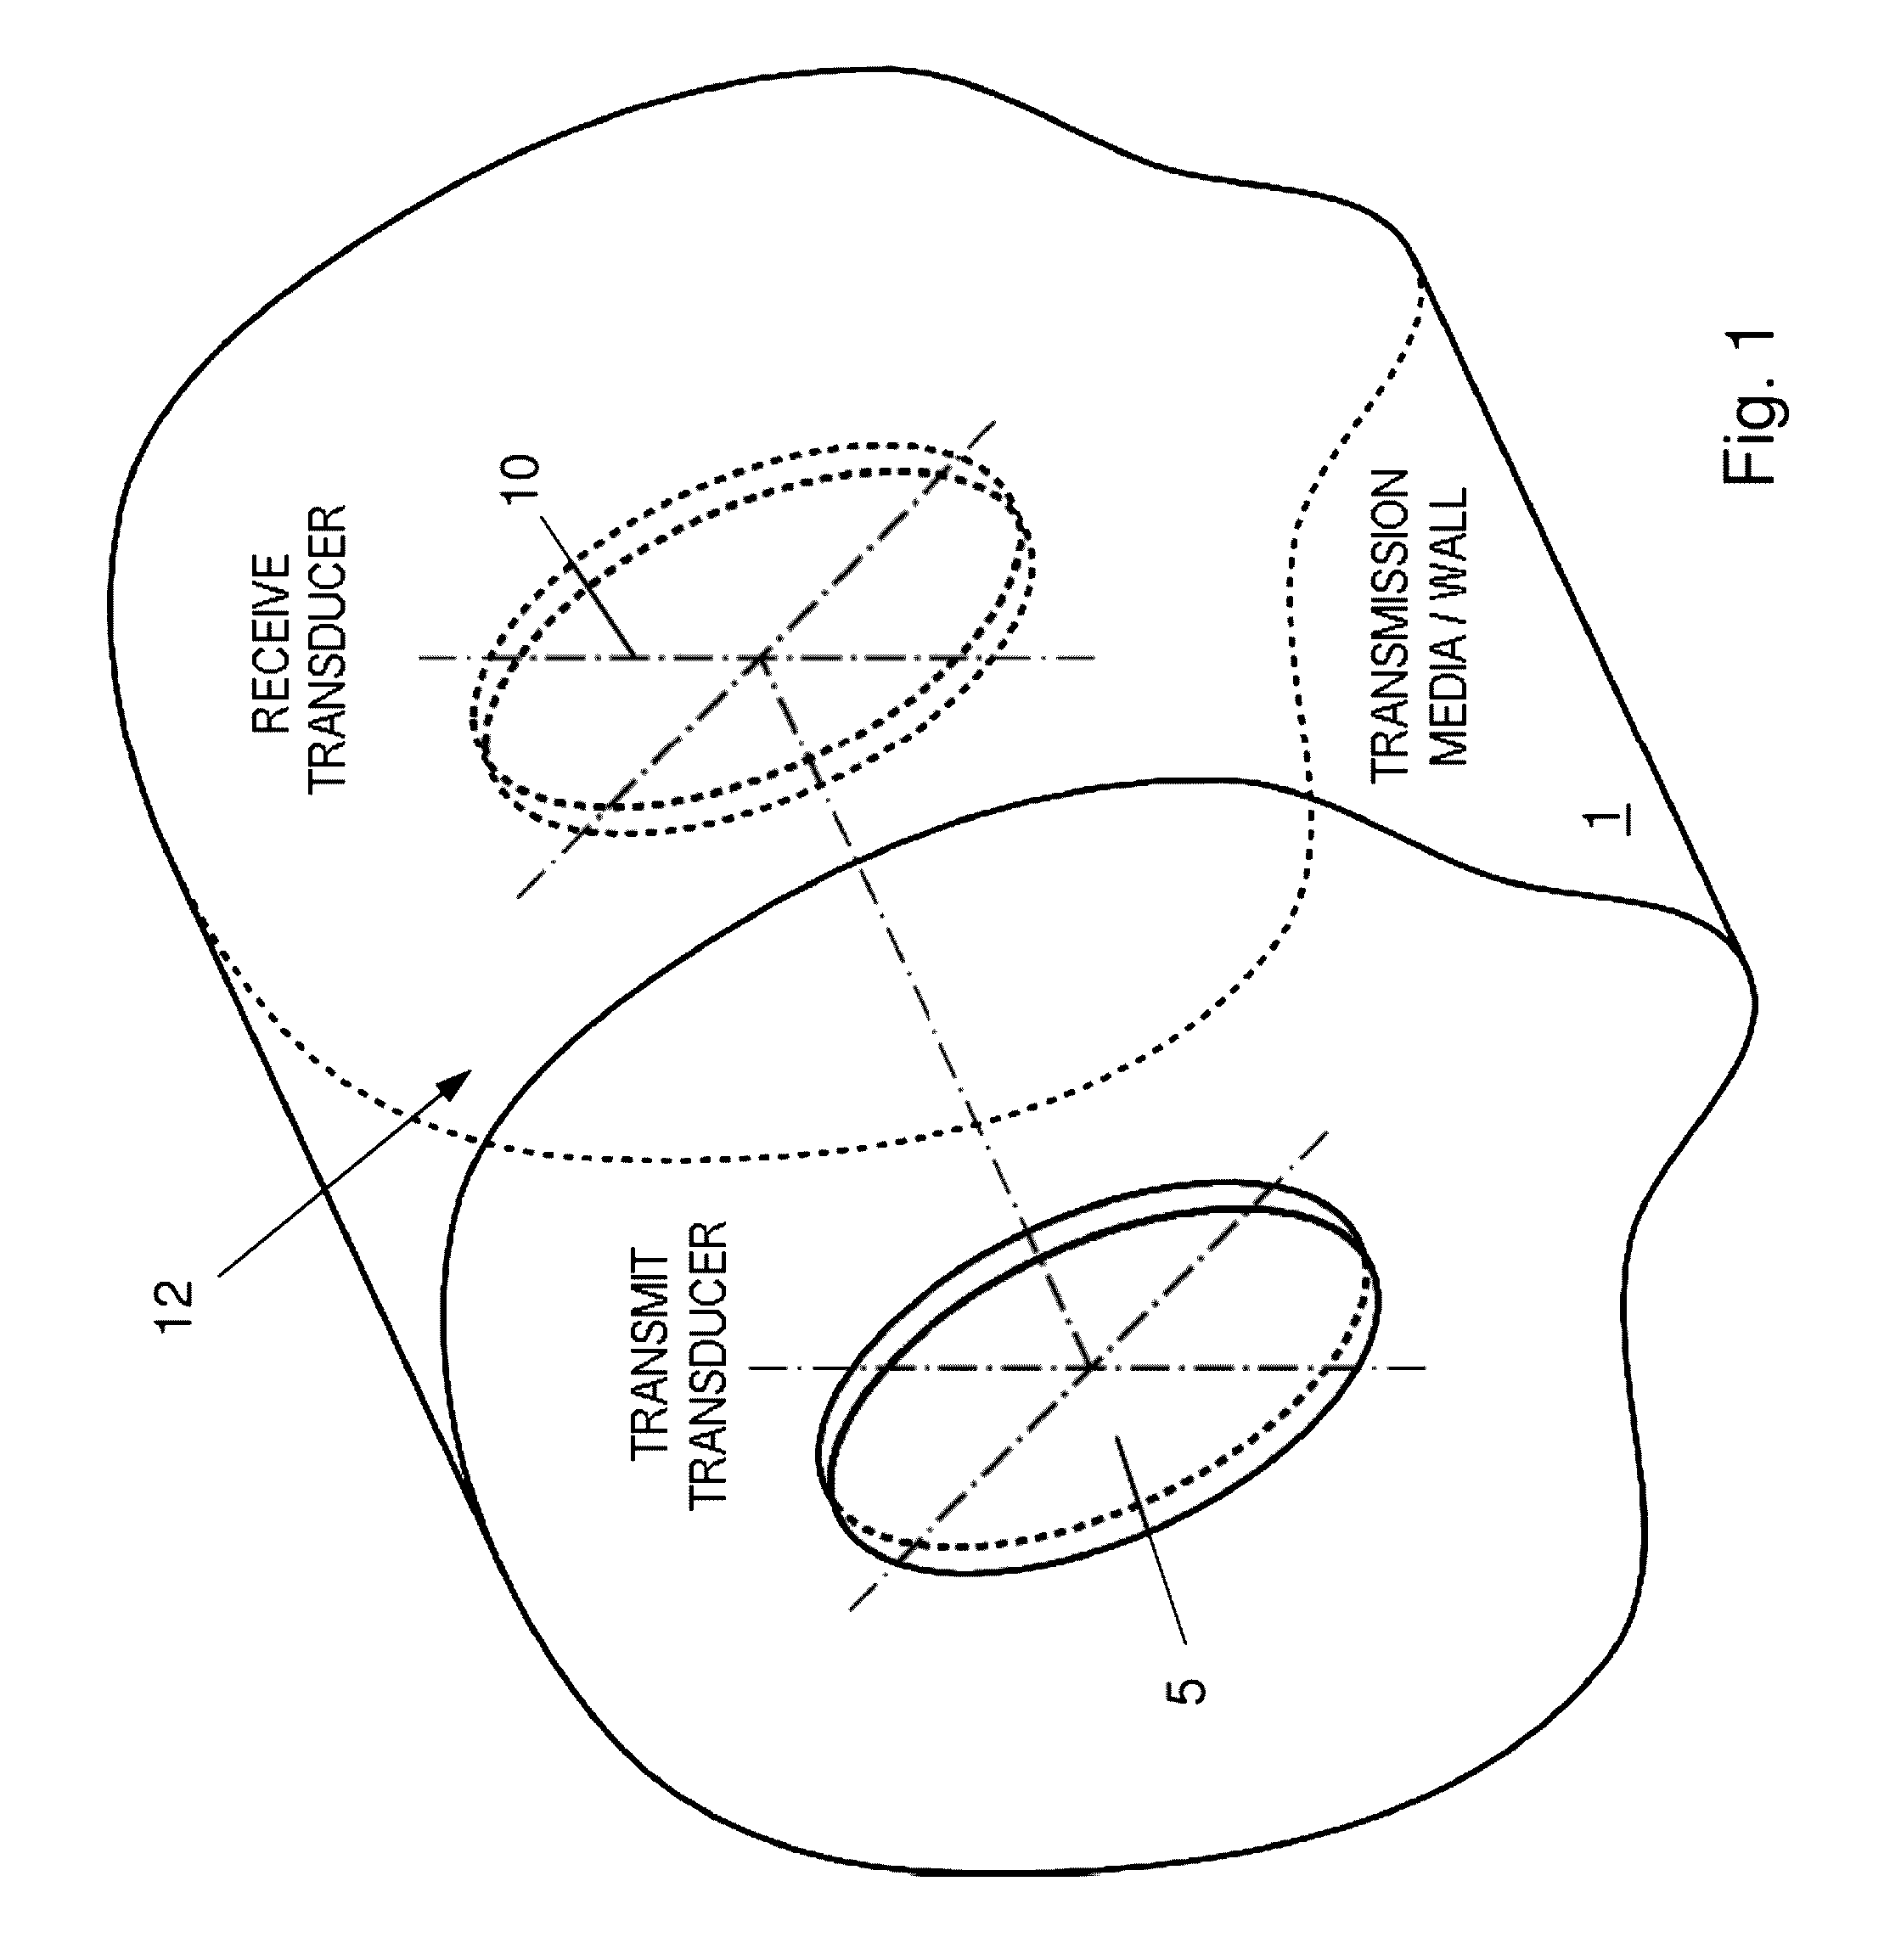 Acoustic-electric channel construction and operation using adaptive transducer arrays